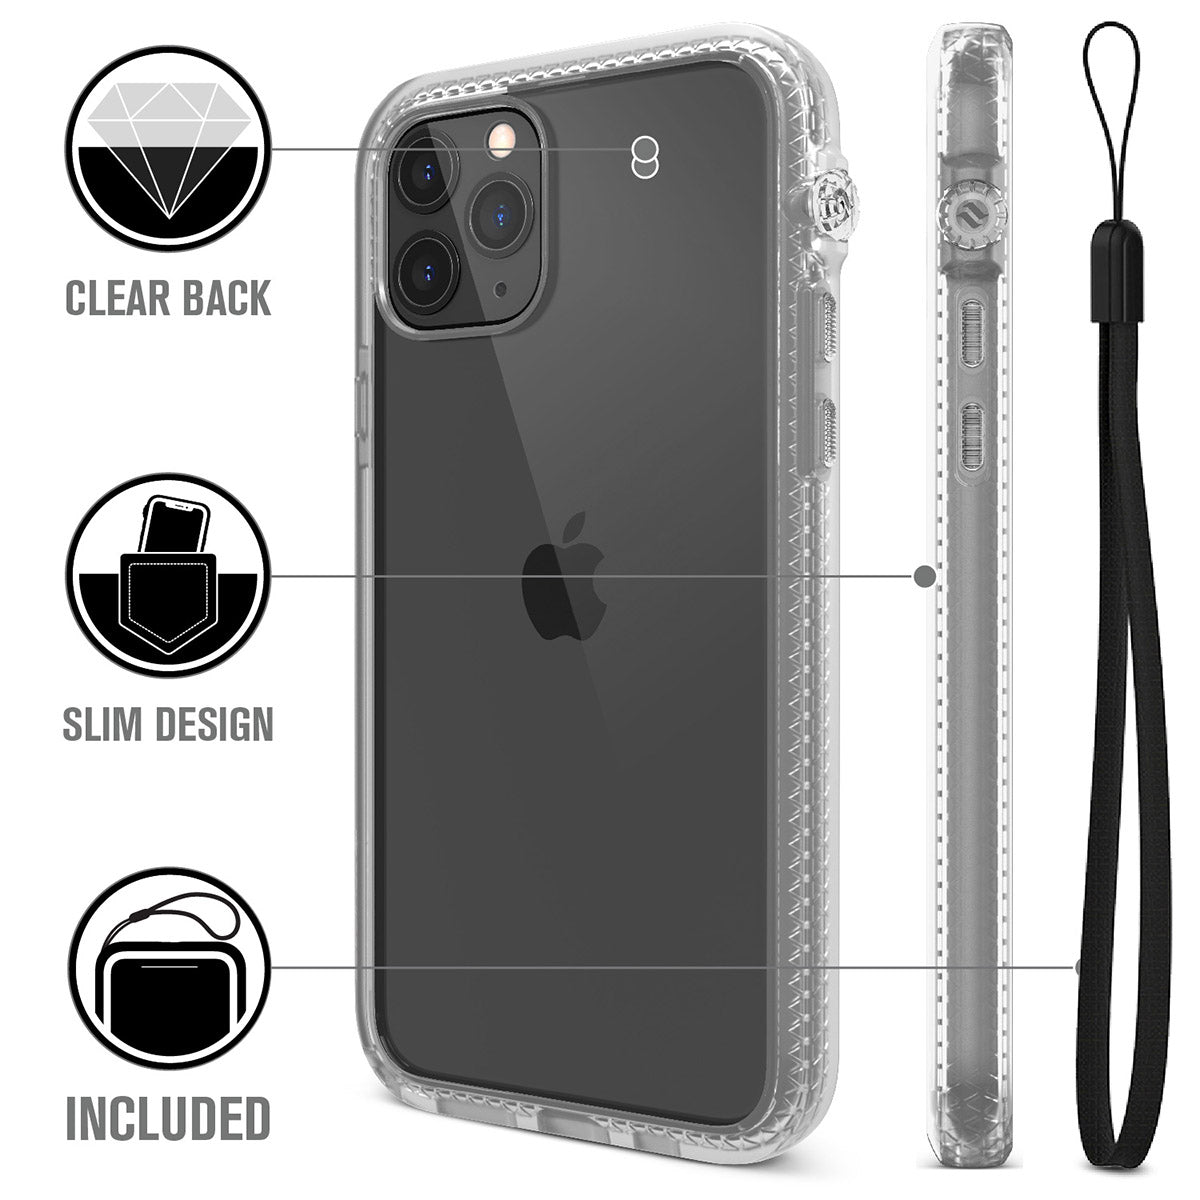 catalyst iPhone 11 series impact protection case clear showing the back view and buttons of the case for iPhone 11 pro and a lanyard text reads clear back slim design included